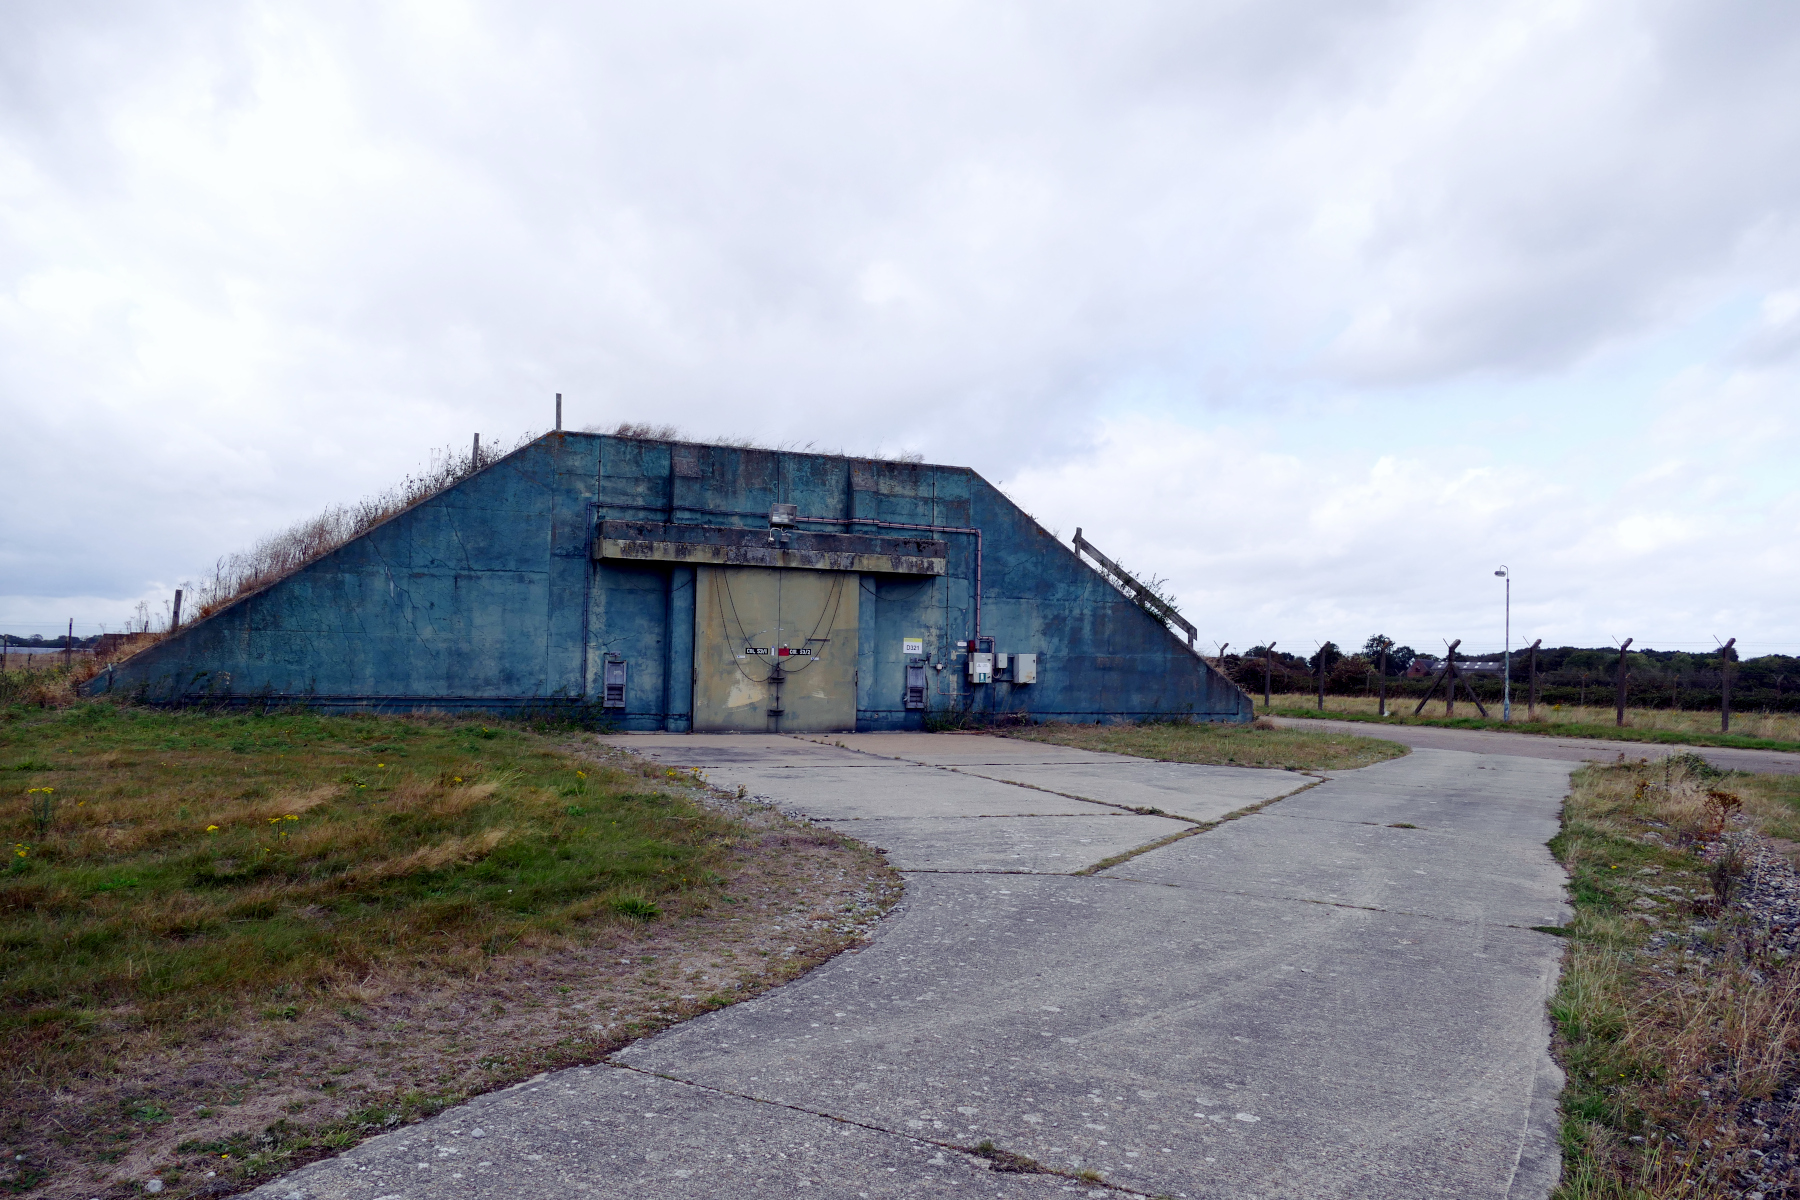 Wide shot of original Cold War bunker with blue walls, green blast door on grass with concrete road